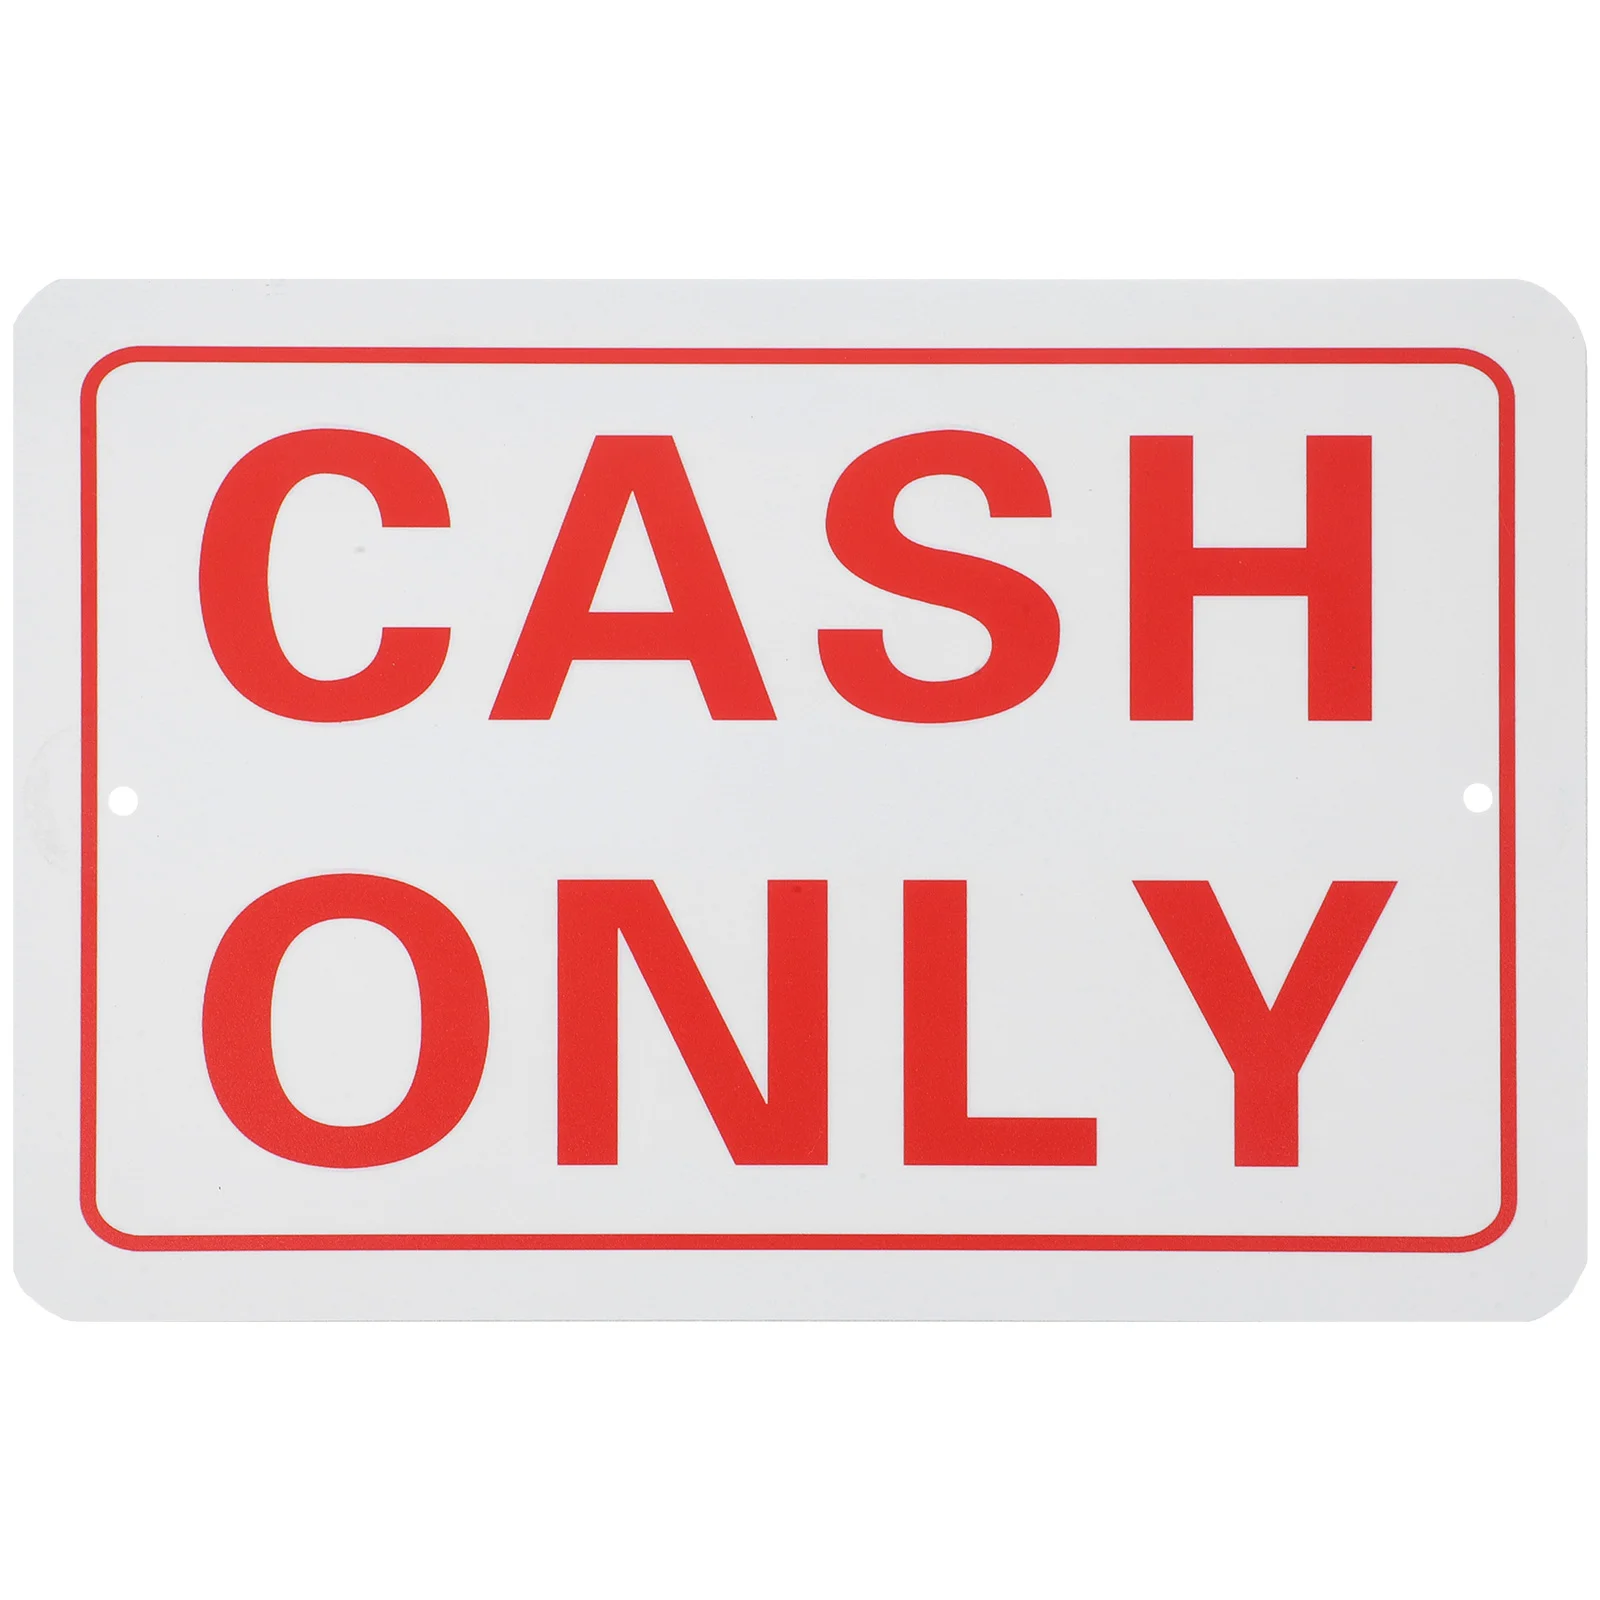 

Cash Sign Only for Shop Wall Business Accepted Cashier Store No Credit Card Checks Emblems